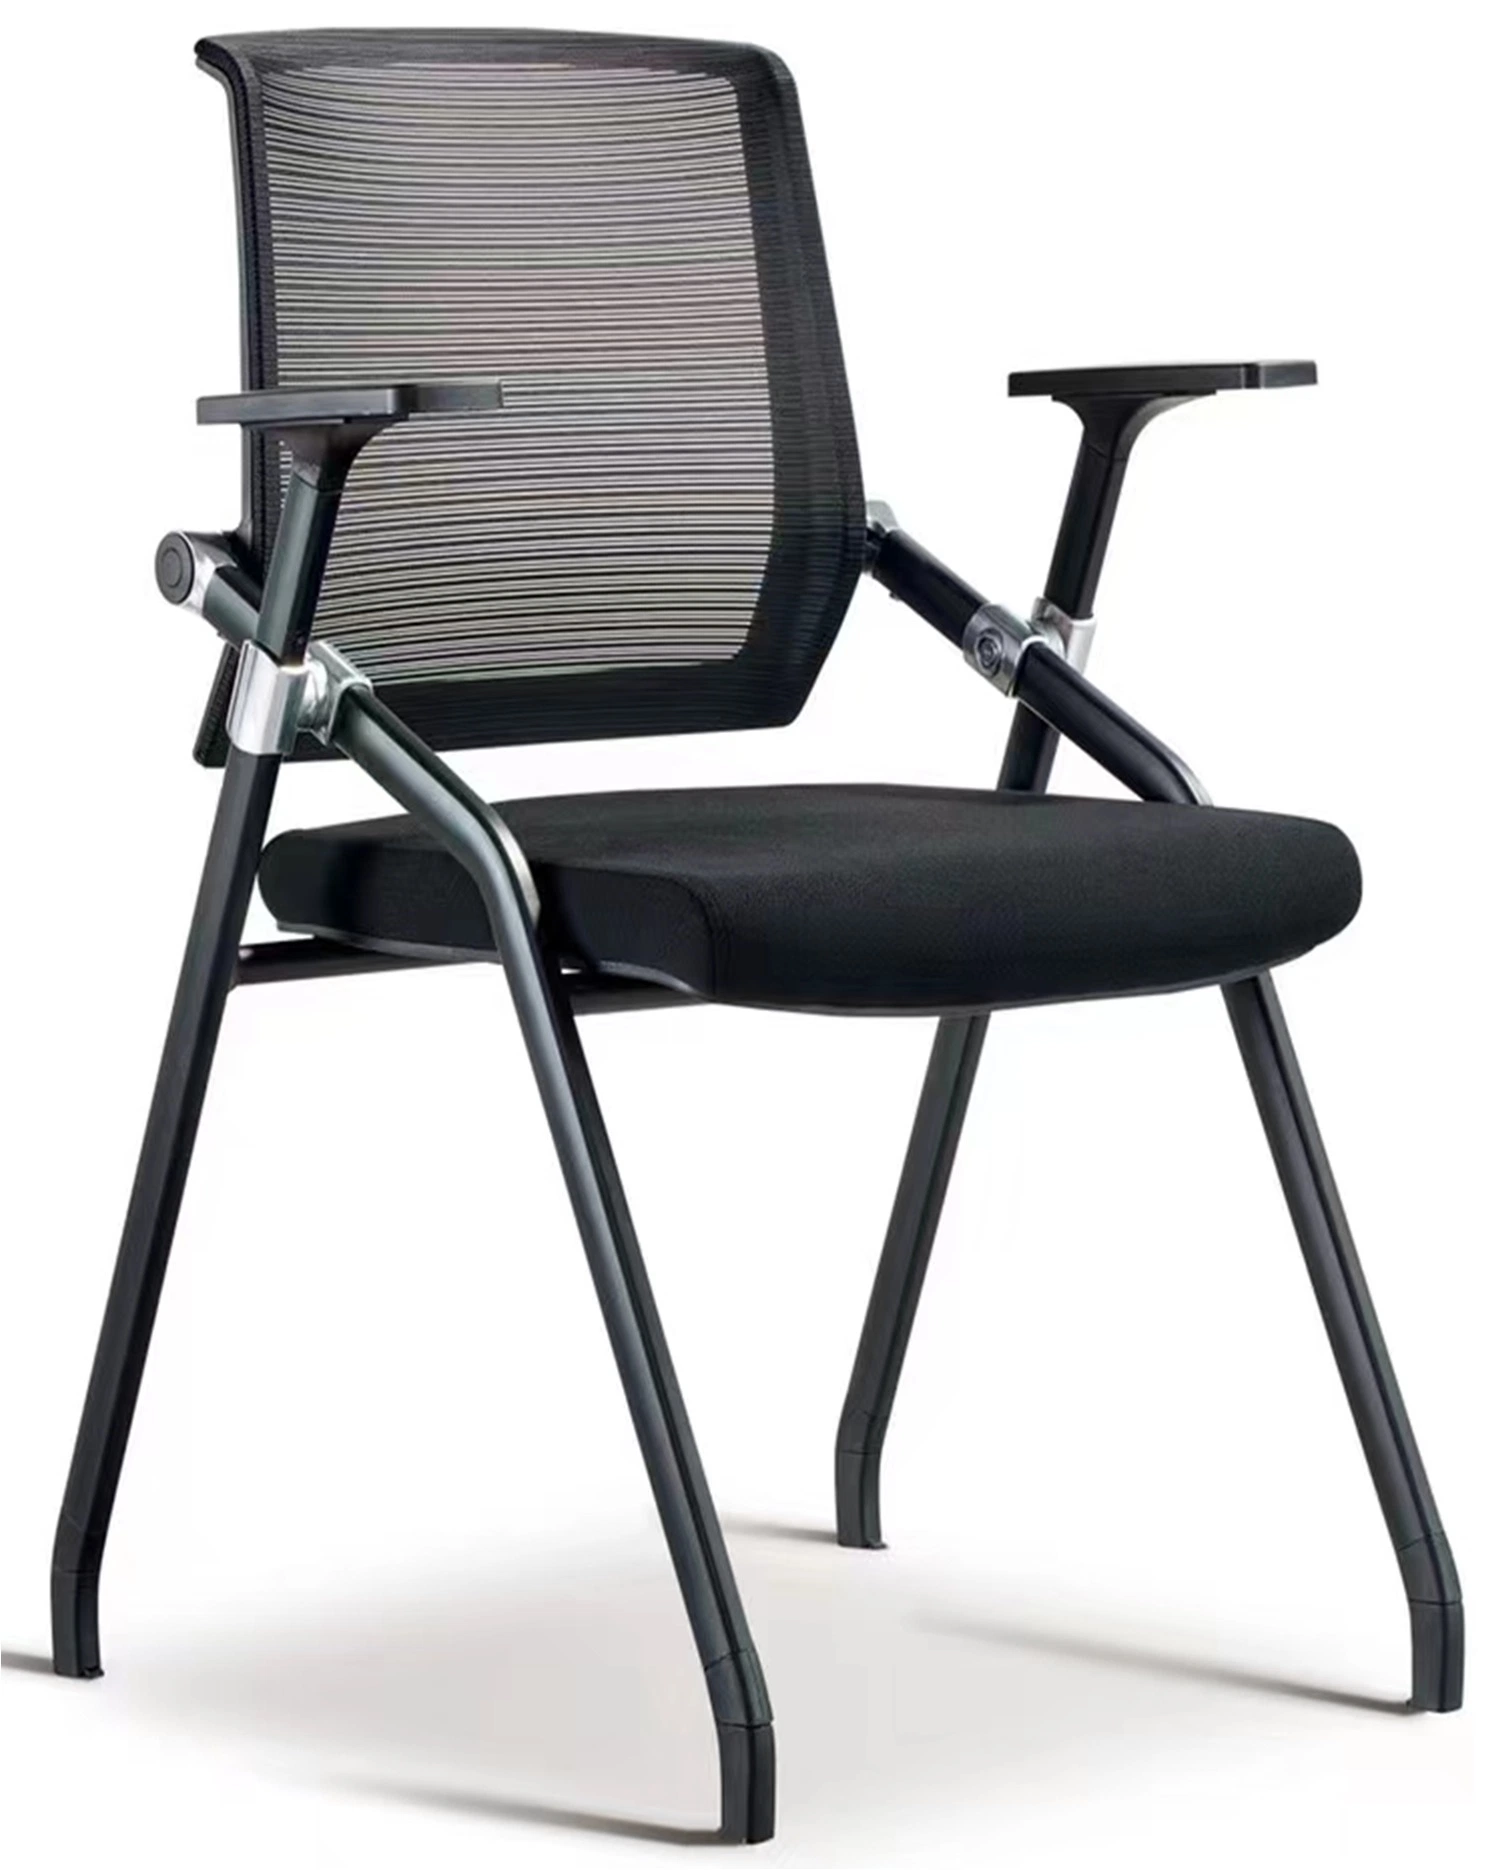 Clerk Chair Mesh Office Chair Training Chair Without Writing Board